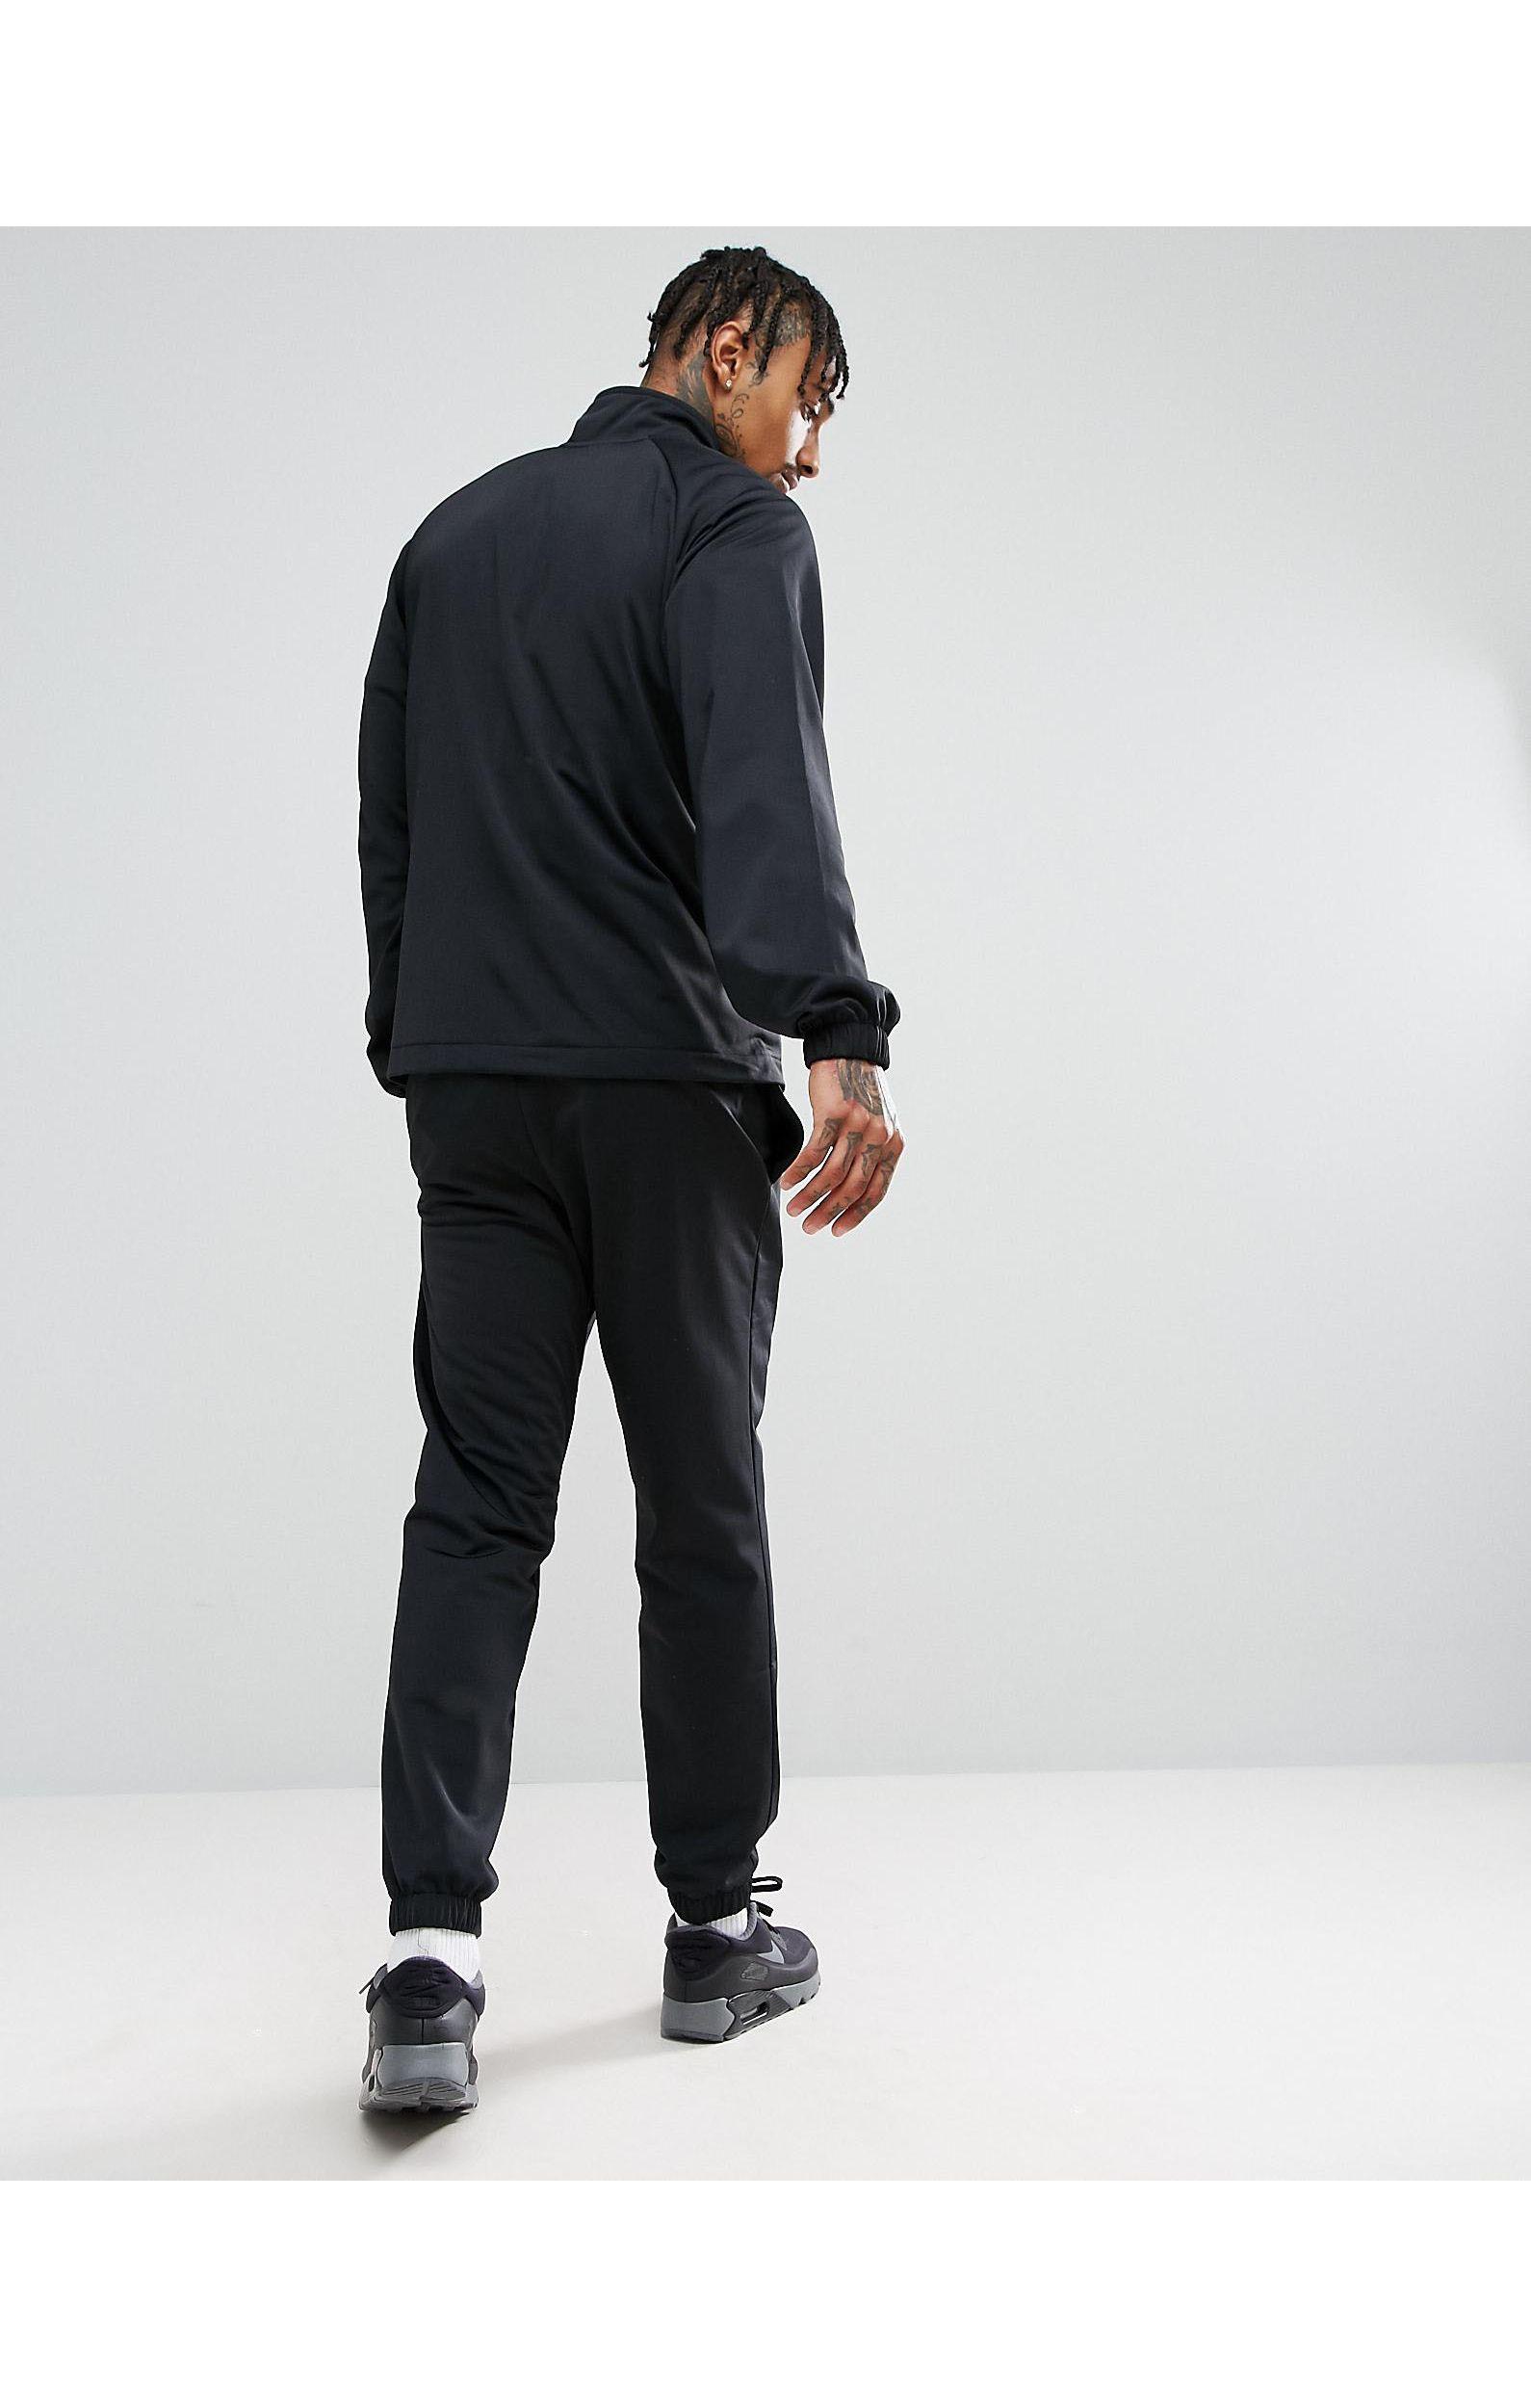 Nike Synthetic Polyknit Tracksuit Set in Black for Men - Lyst